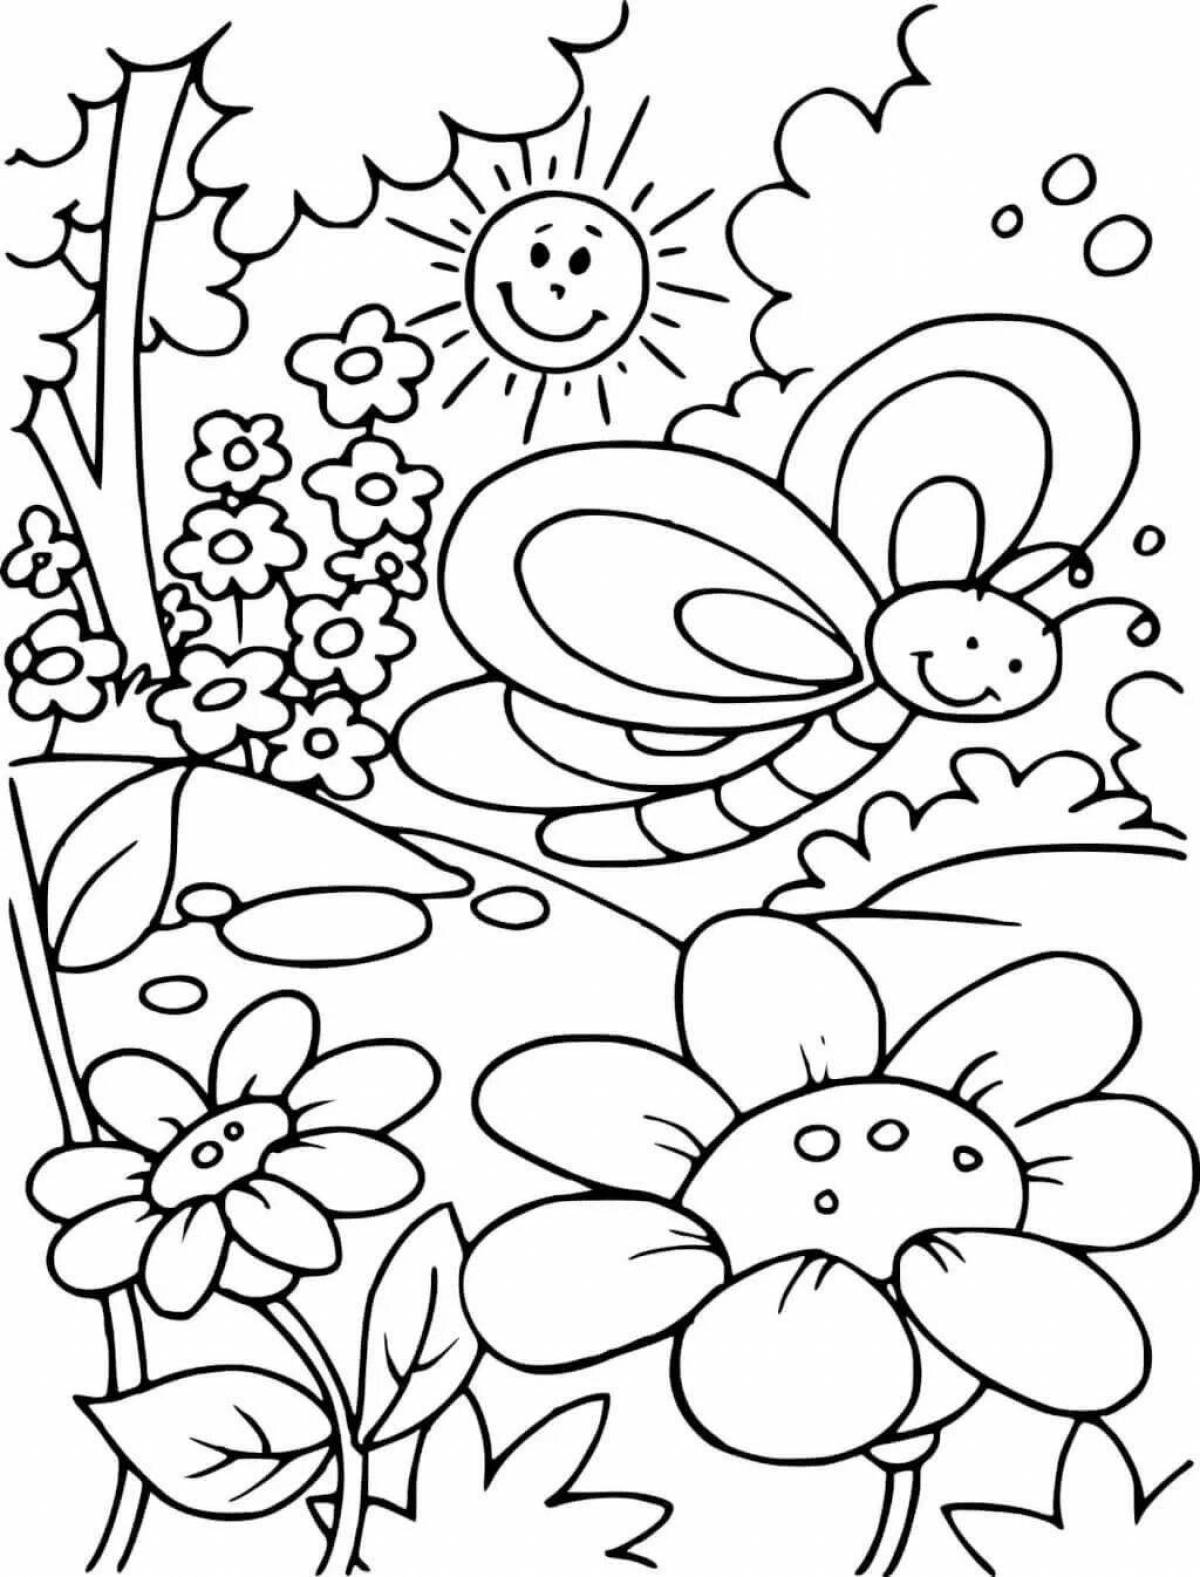 Colorful meadow coloring for children